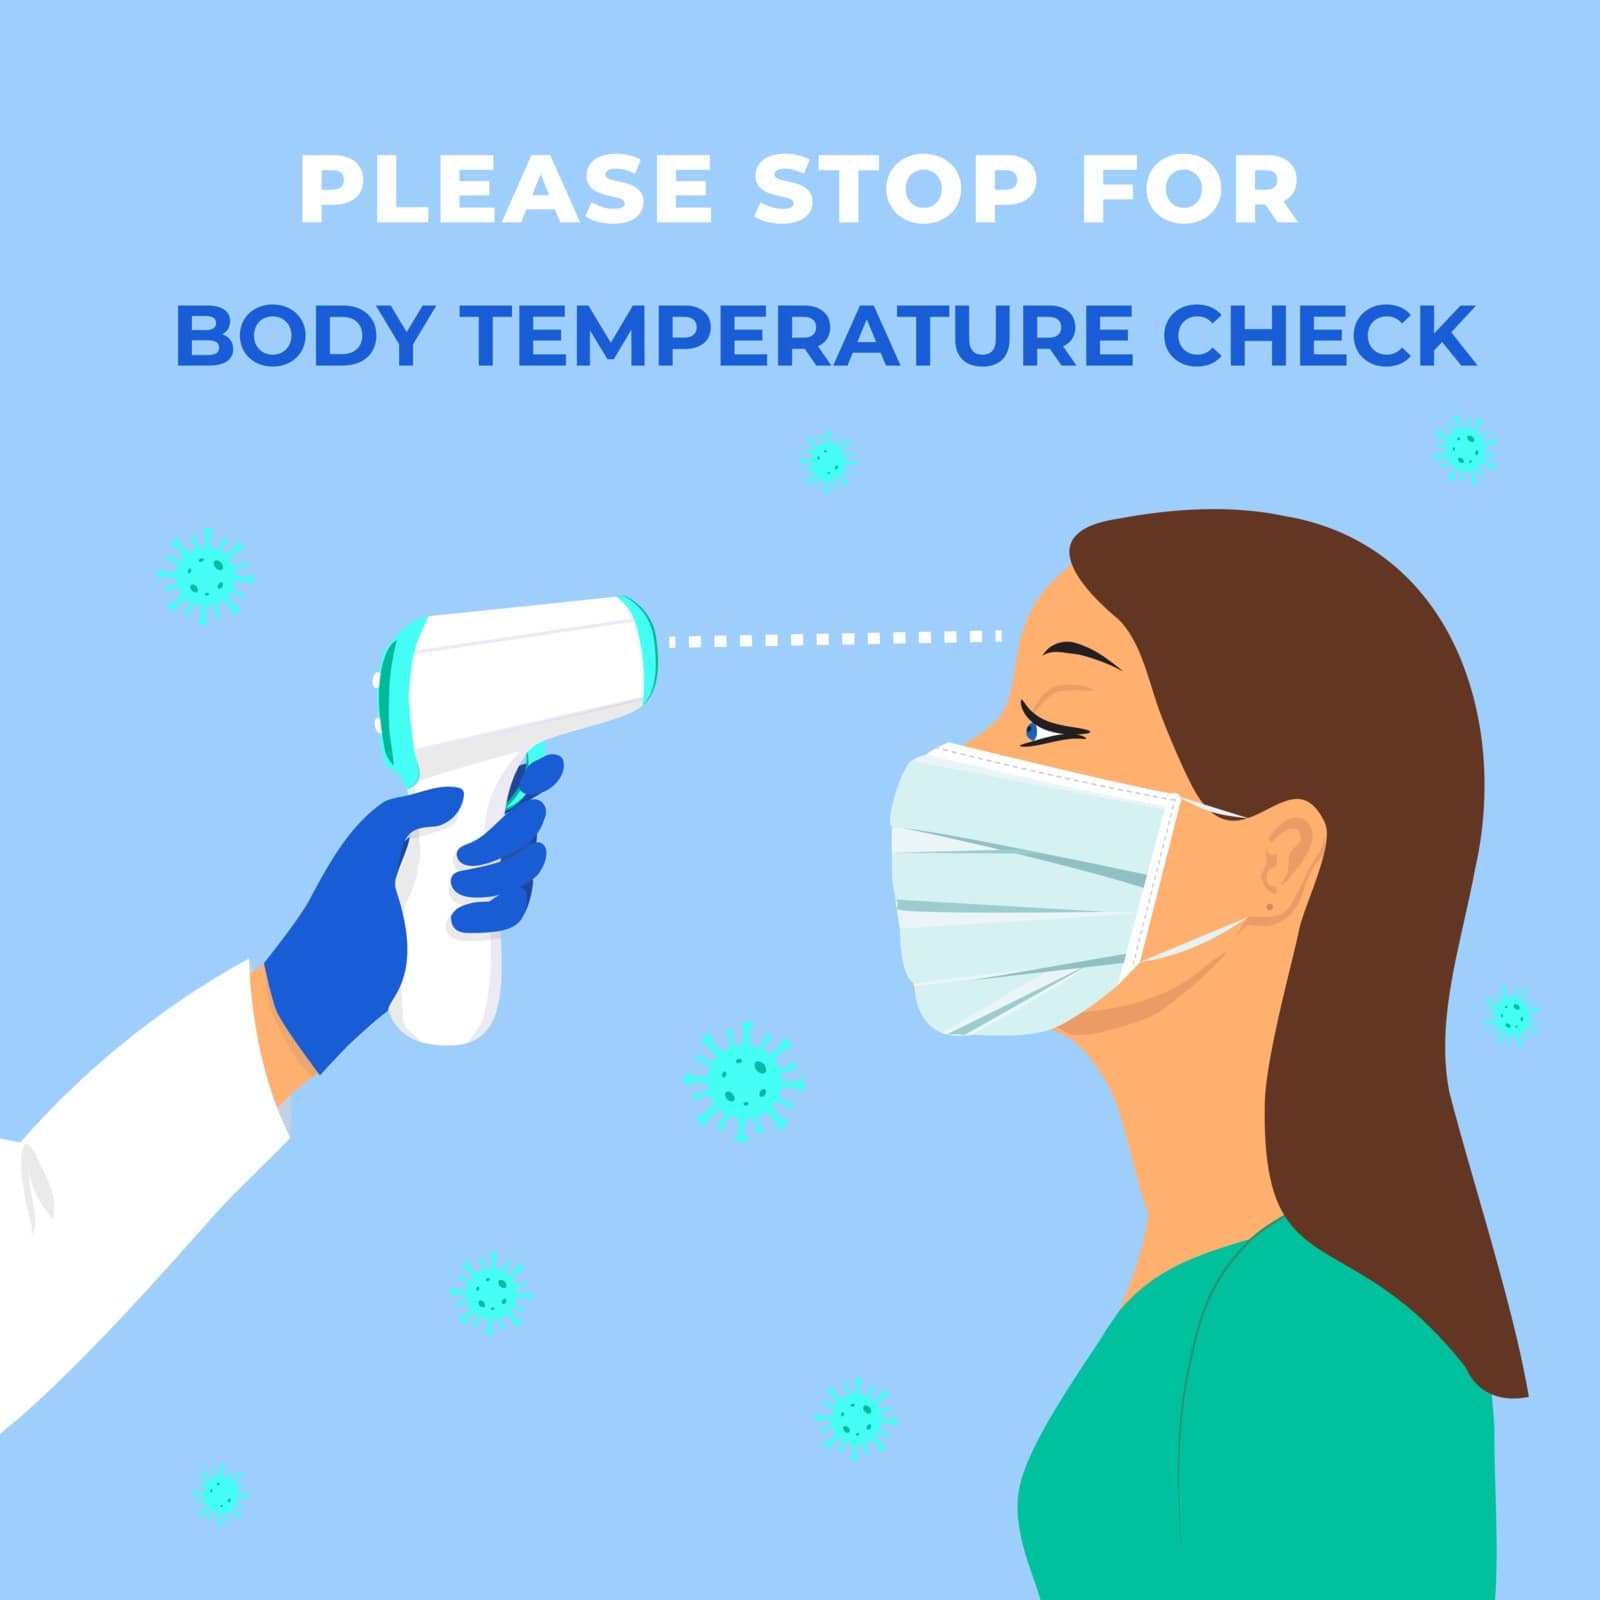 Fever check. Body temperature check required banner during Covid-19 Outbreak. Coronavirus pandemic prevention. Woman measuring body temperature and wearing a face mask vector illustration.